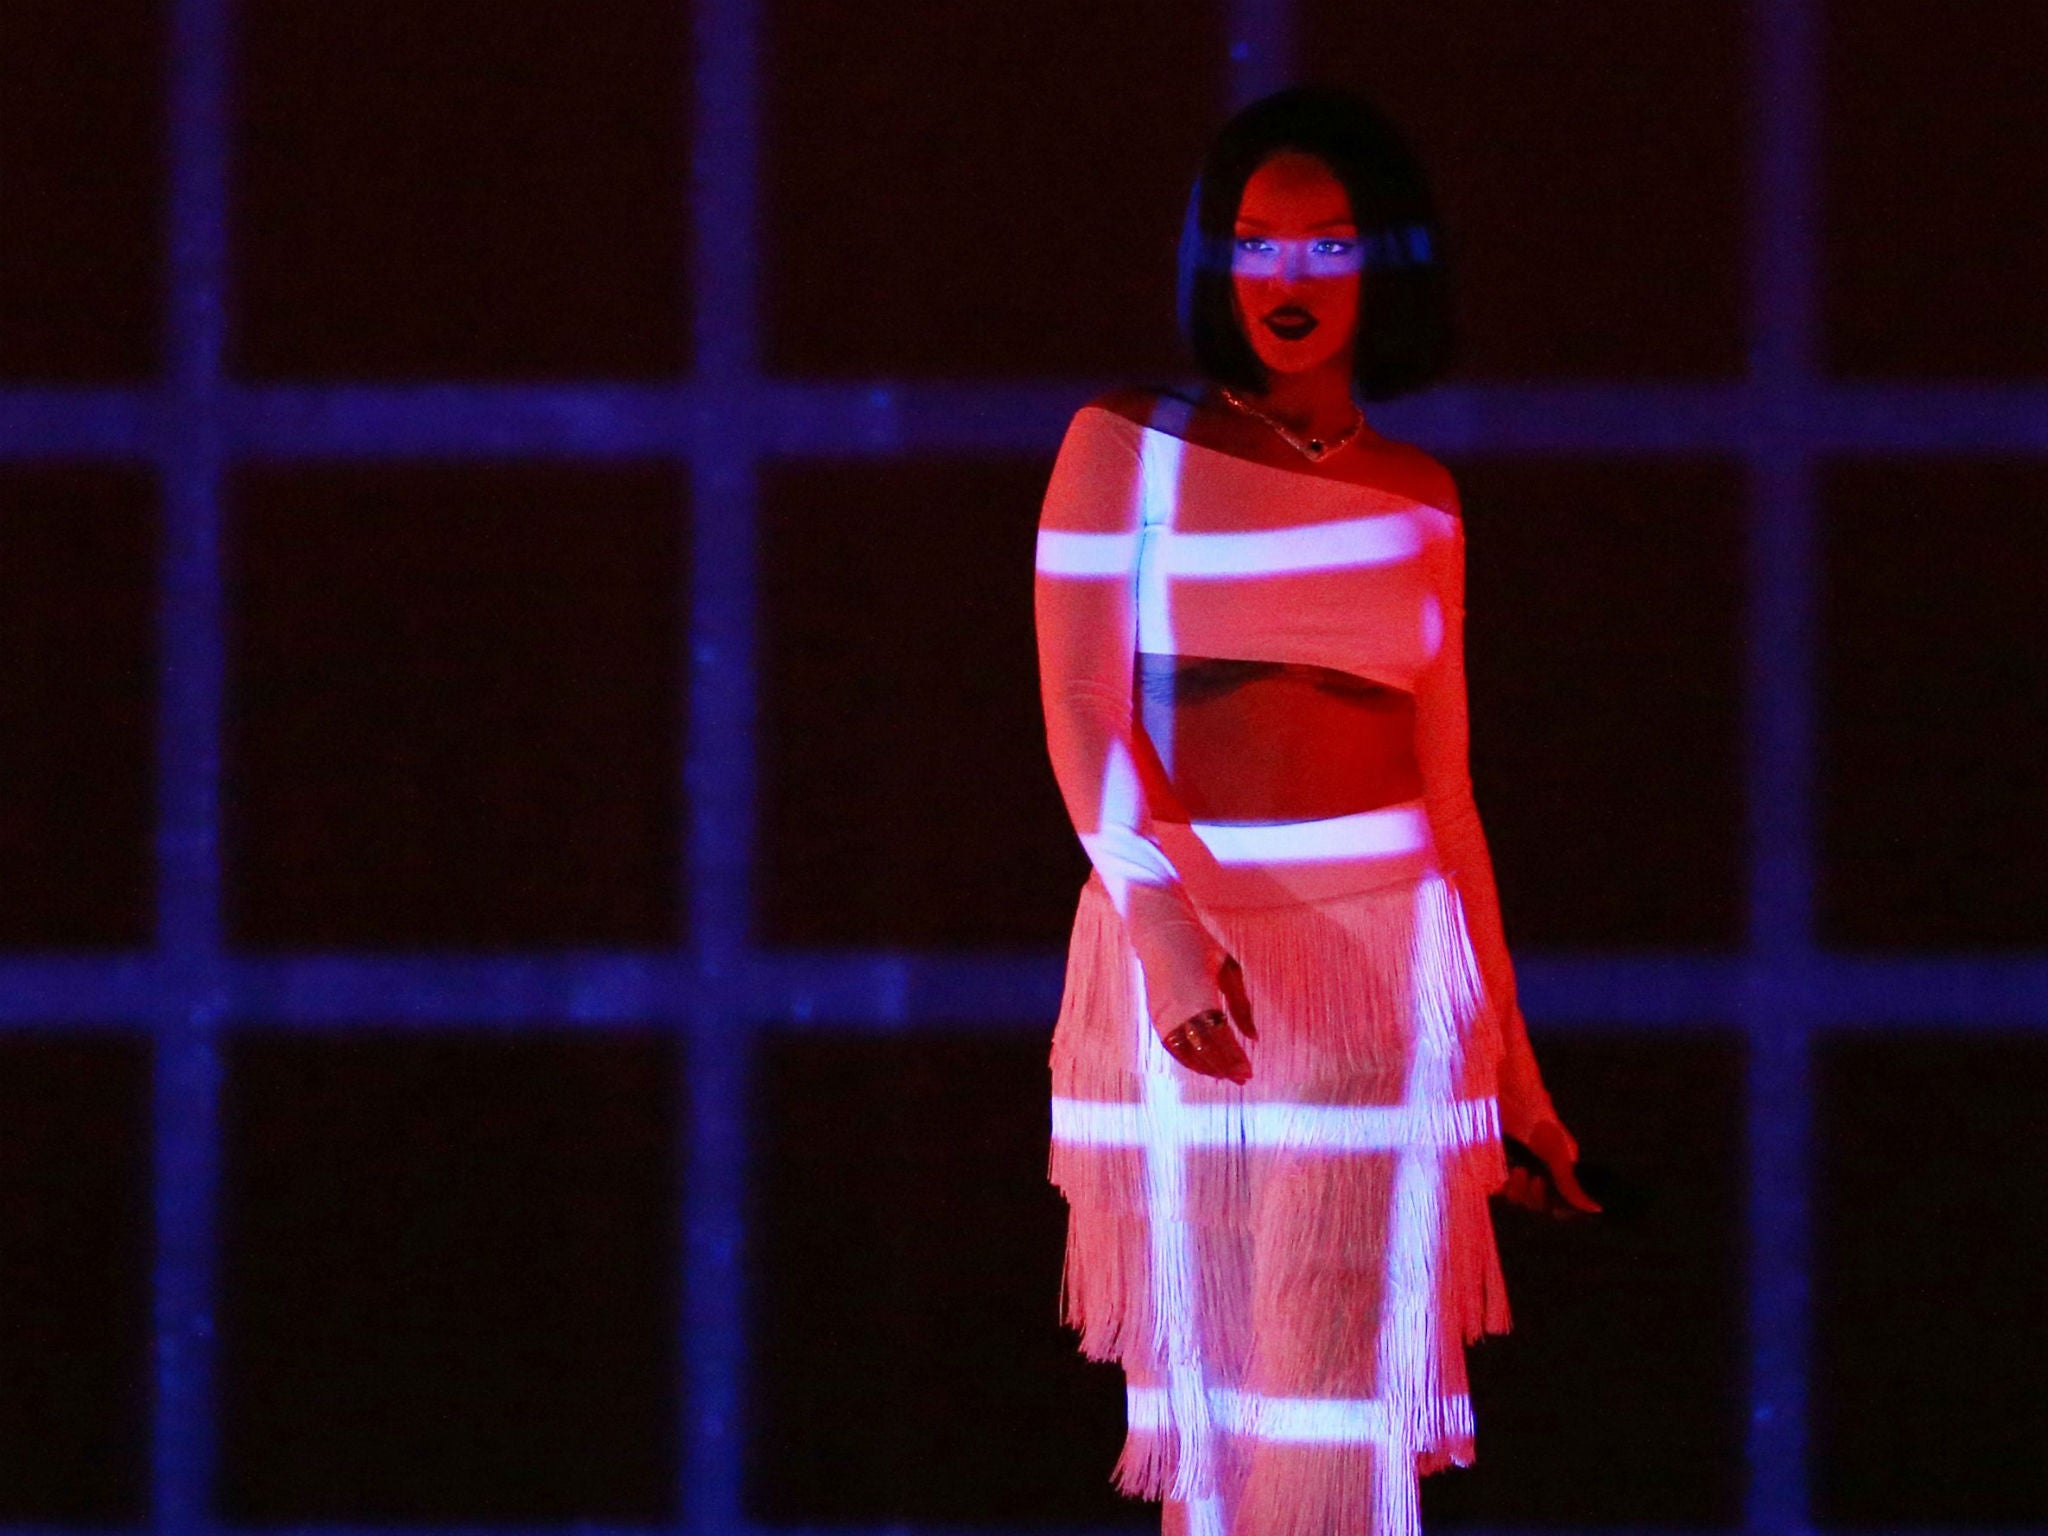 Rihanna recently surprised fans by joining Calvin Harris on stage at Coachella